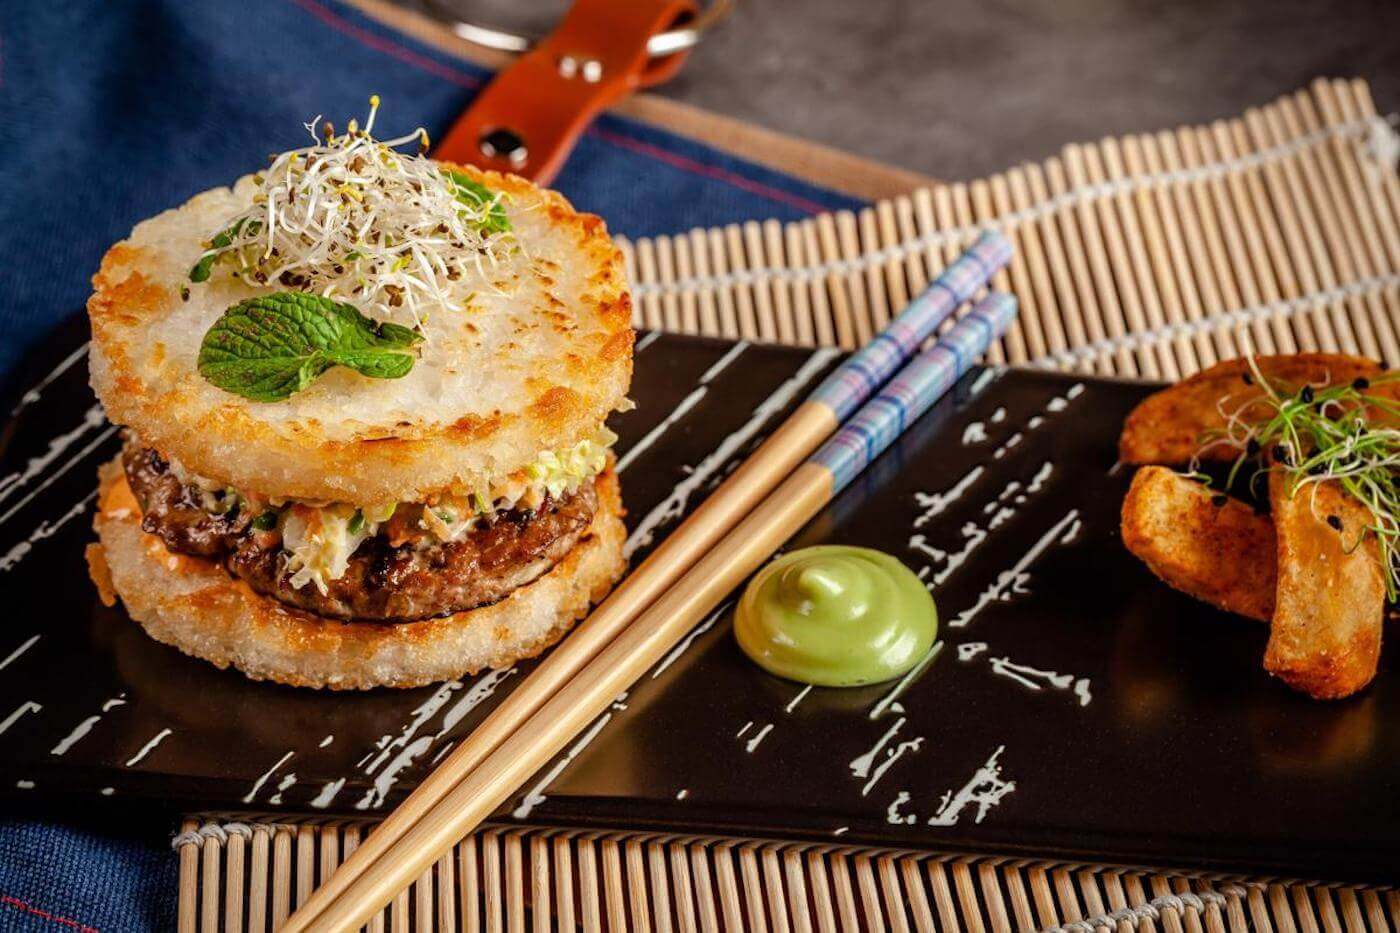 Burger with a rice bun sitting on a plate with chop sticks